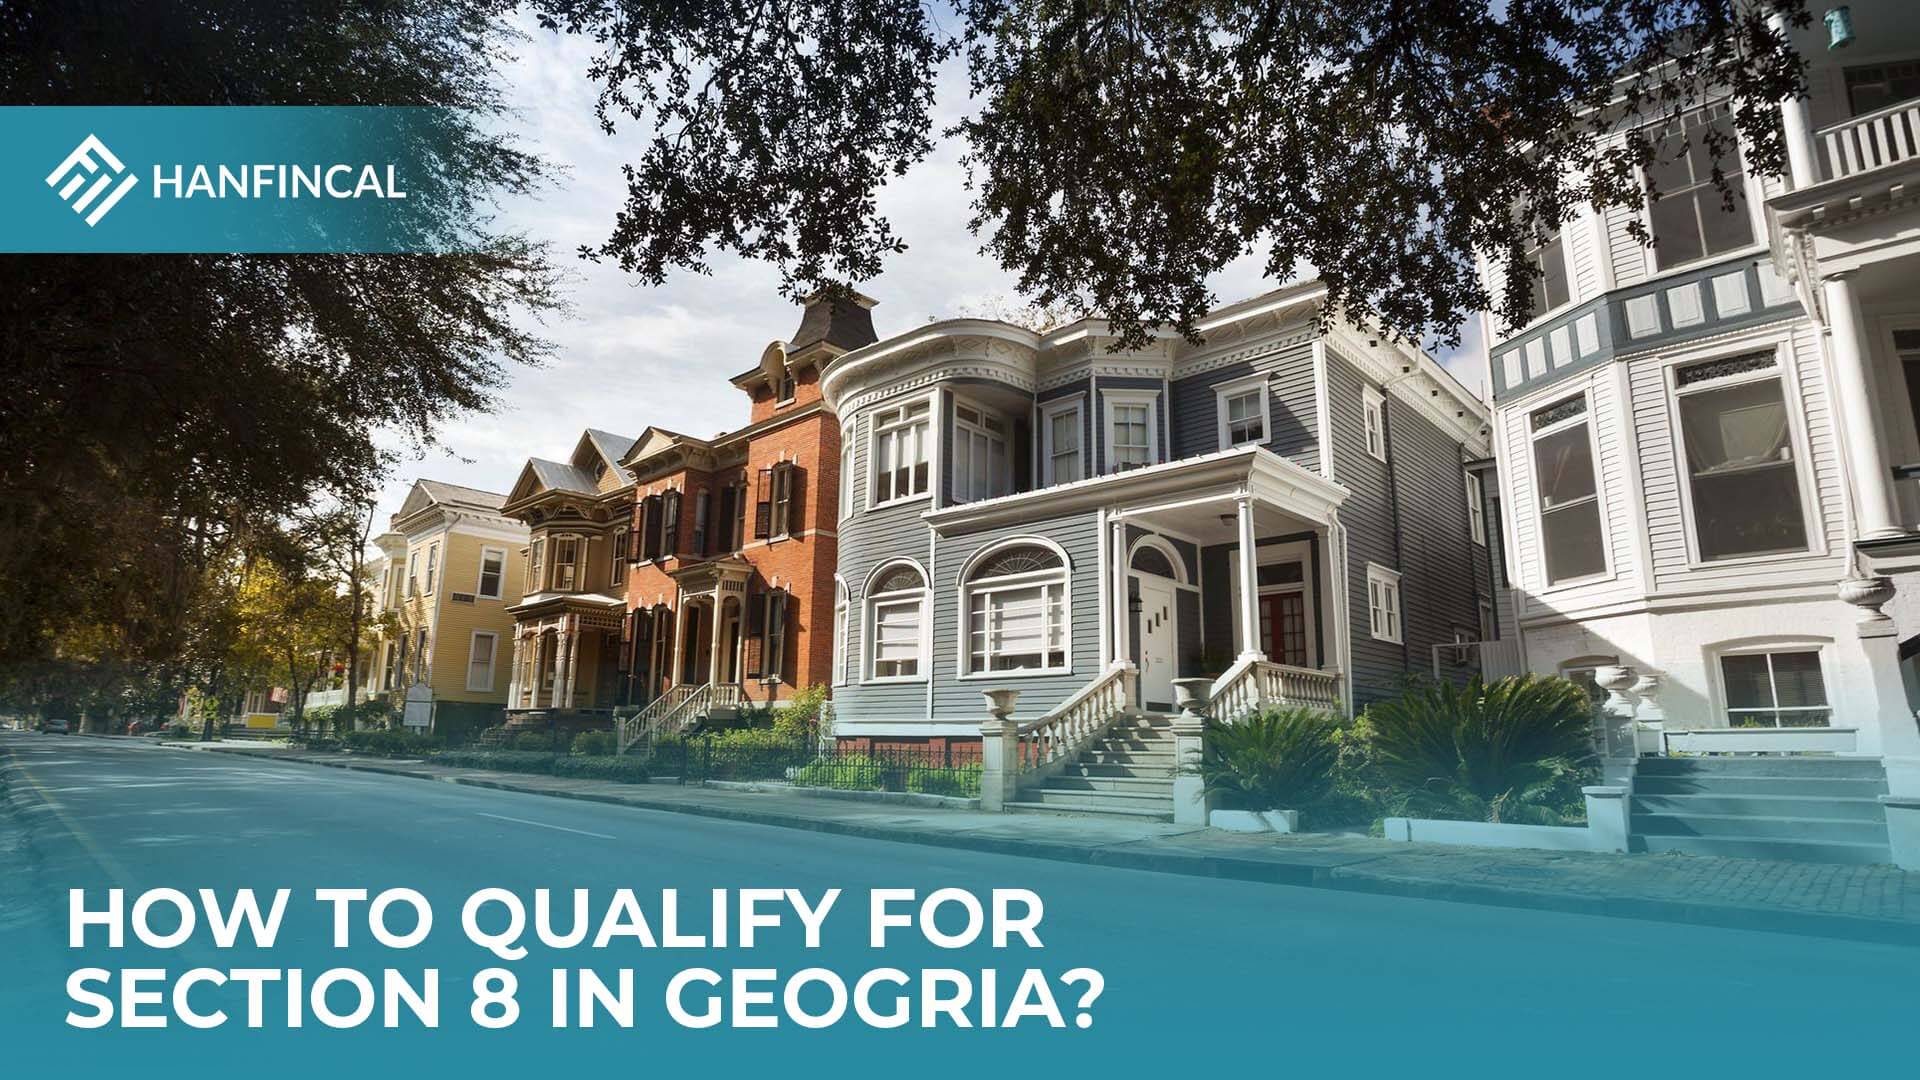 How To Qualify For Section 8 Housing In Georgia (GA)?